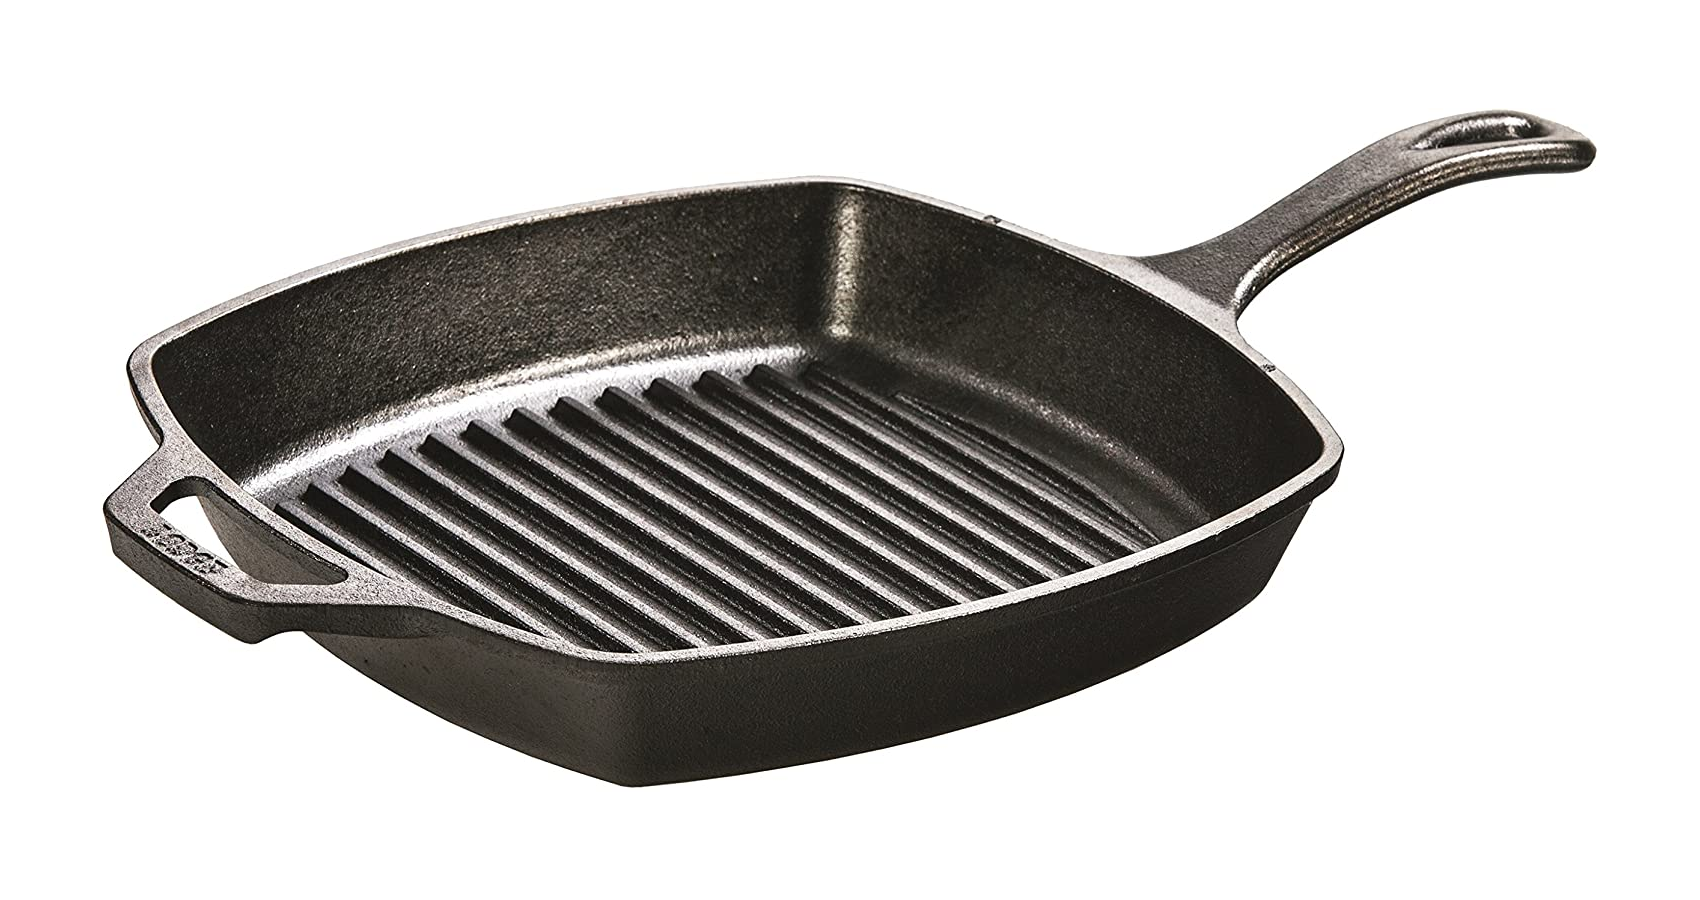 Lodge 10.25 in. Dual Handle Cast Iron Grill Pan, Black